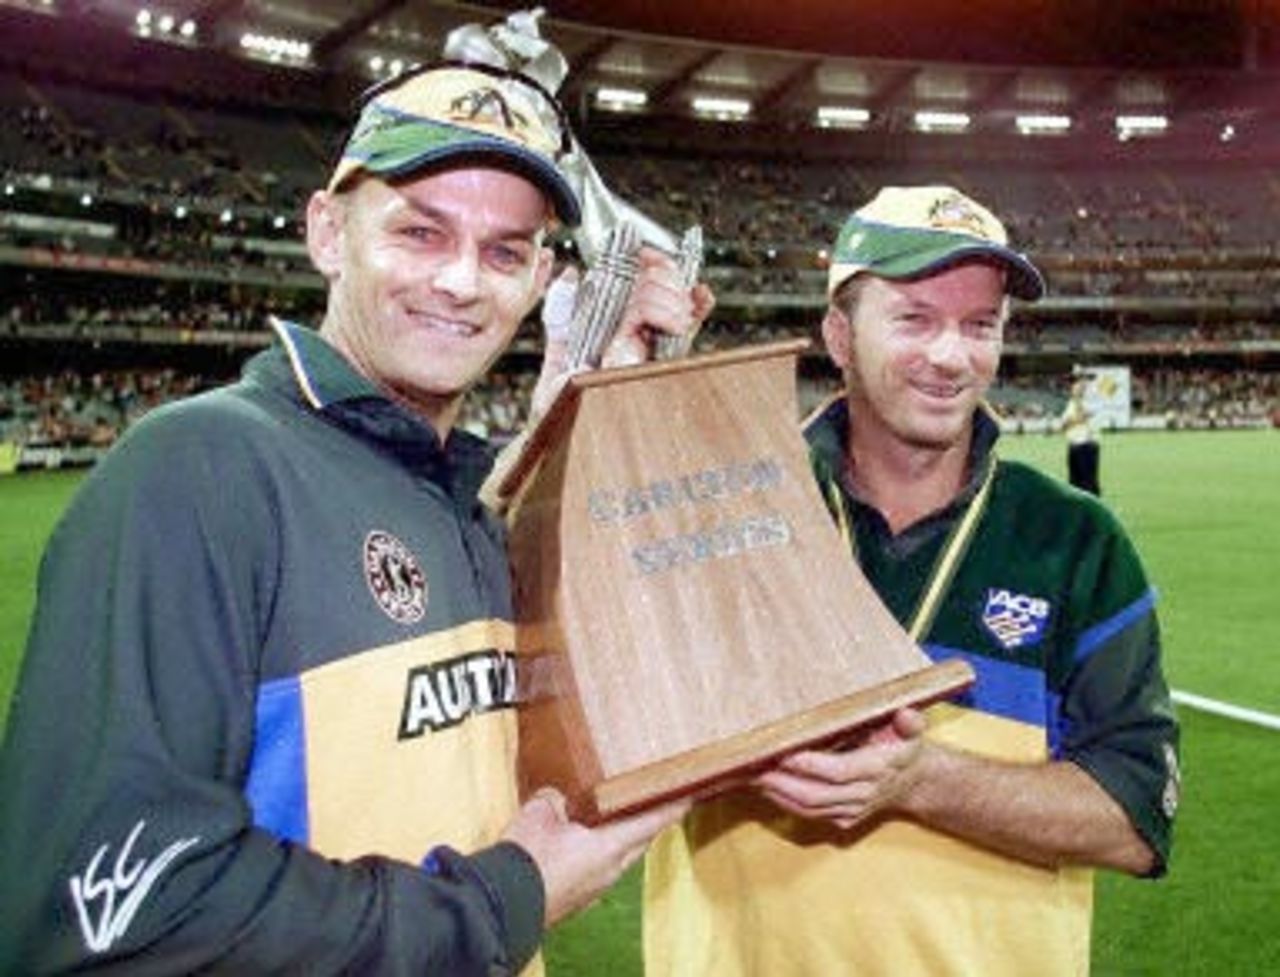 The Australian captain Steve Waugh (R) and vice captain Adam Gilchrist (L) celebrate with the trophy after winning the 2nd one-day final against the West Indies to take out the series 2-0 at the MCG in Melbourne 09 February 2001. Australia amassed the huge total of 338-6 with Mark Waugh topscoring with 173 and in reply the West Indies scored 299 to lose by 39 runs.